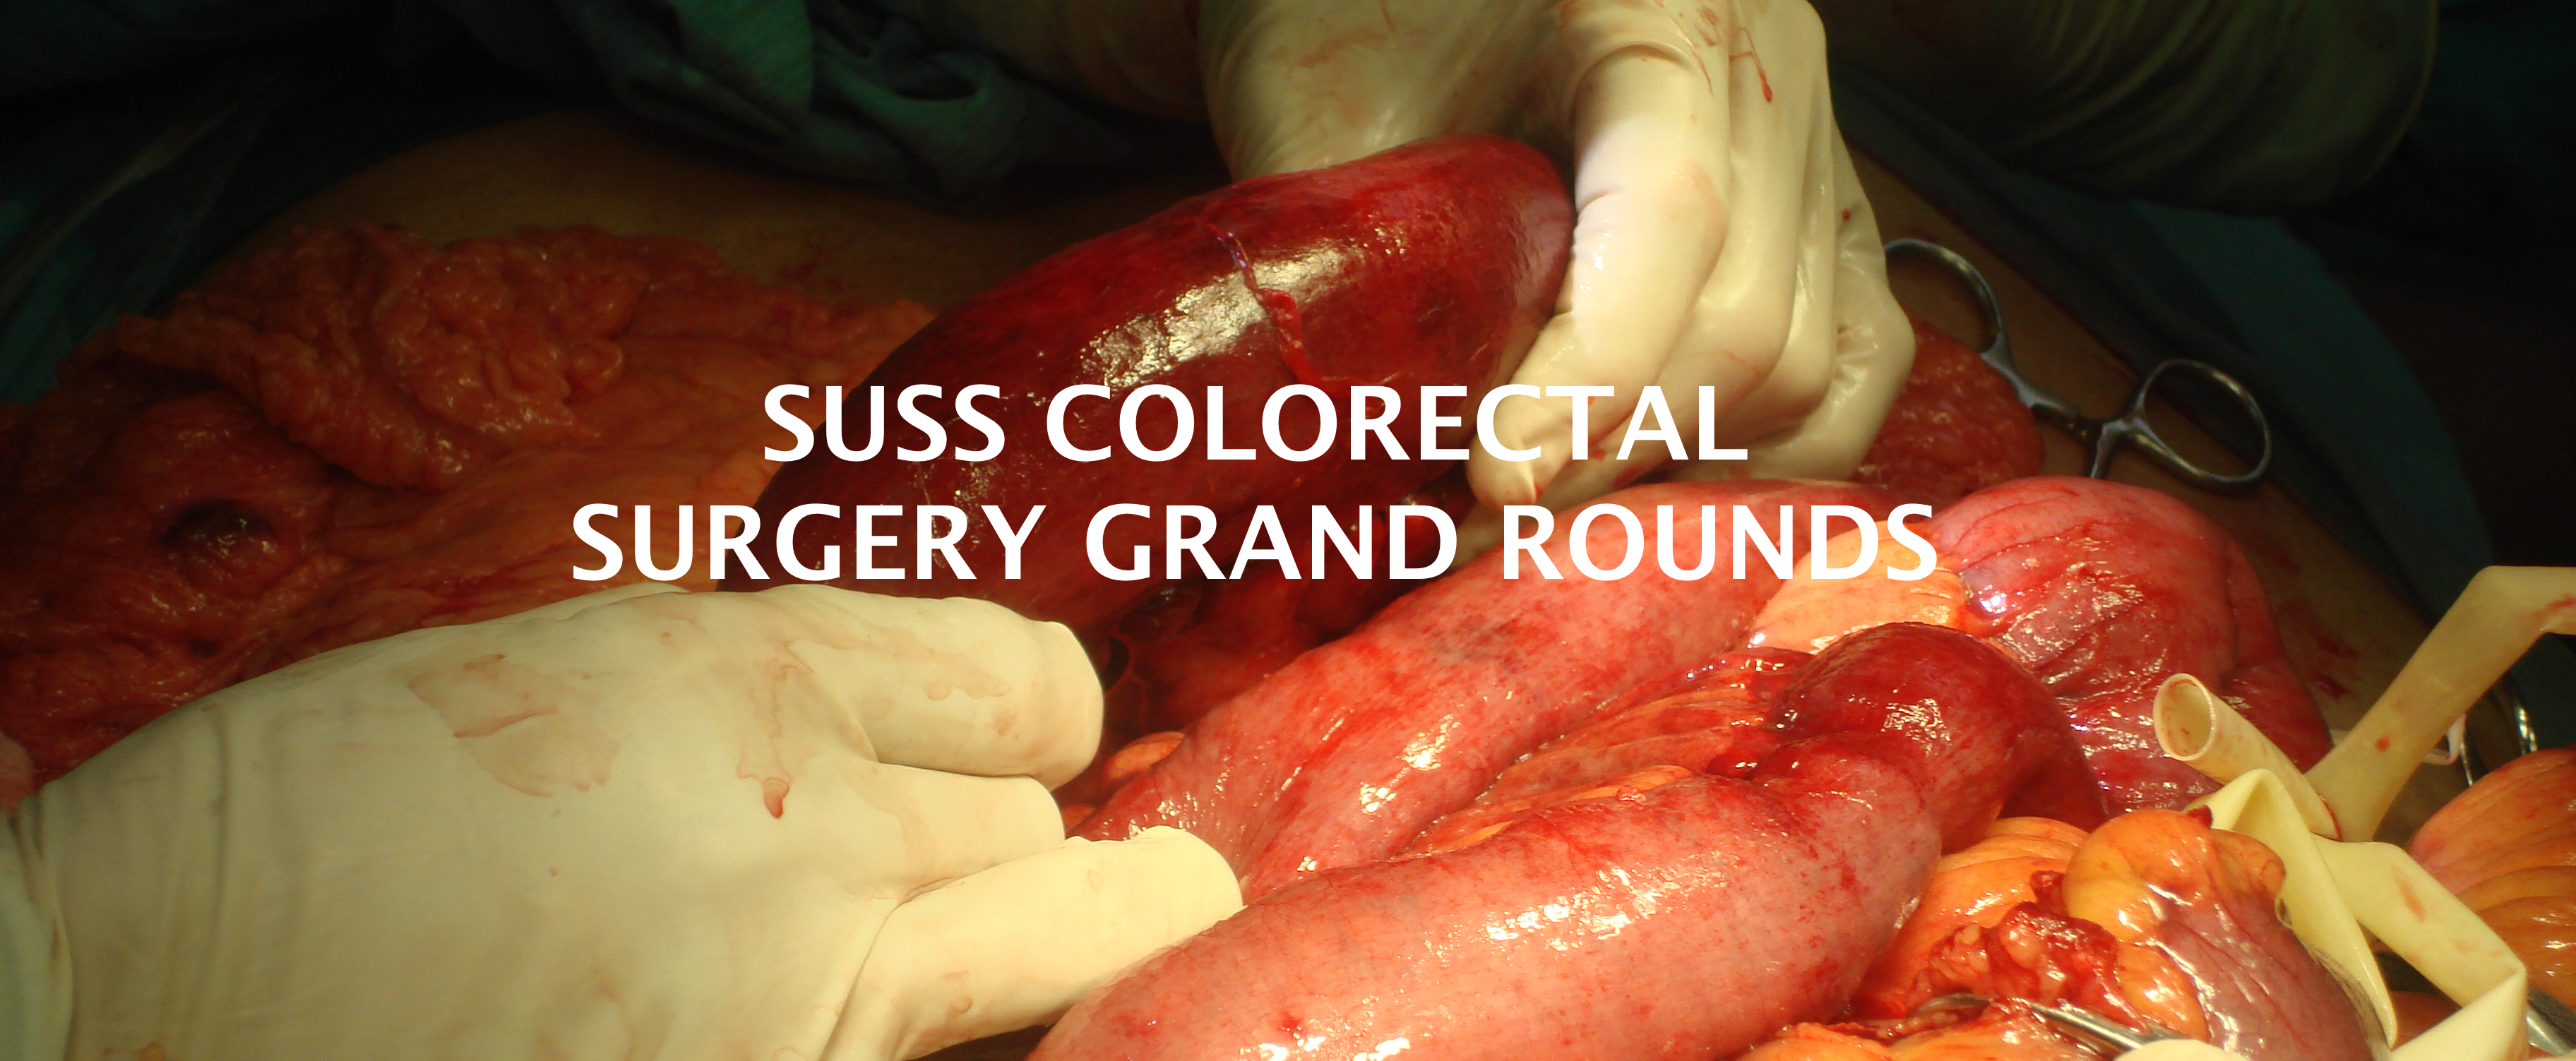 Colorectal Grand Rounds